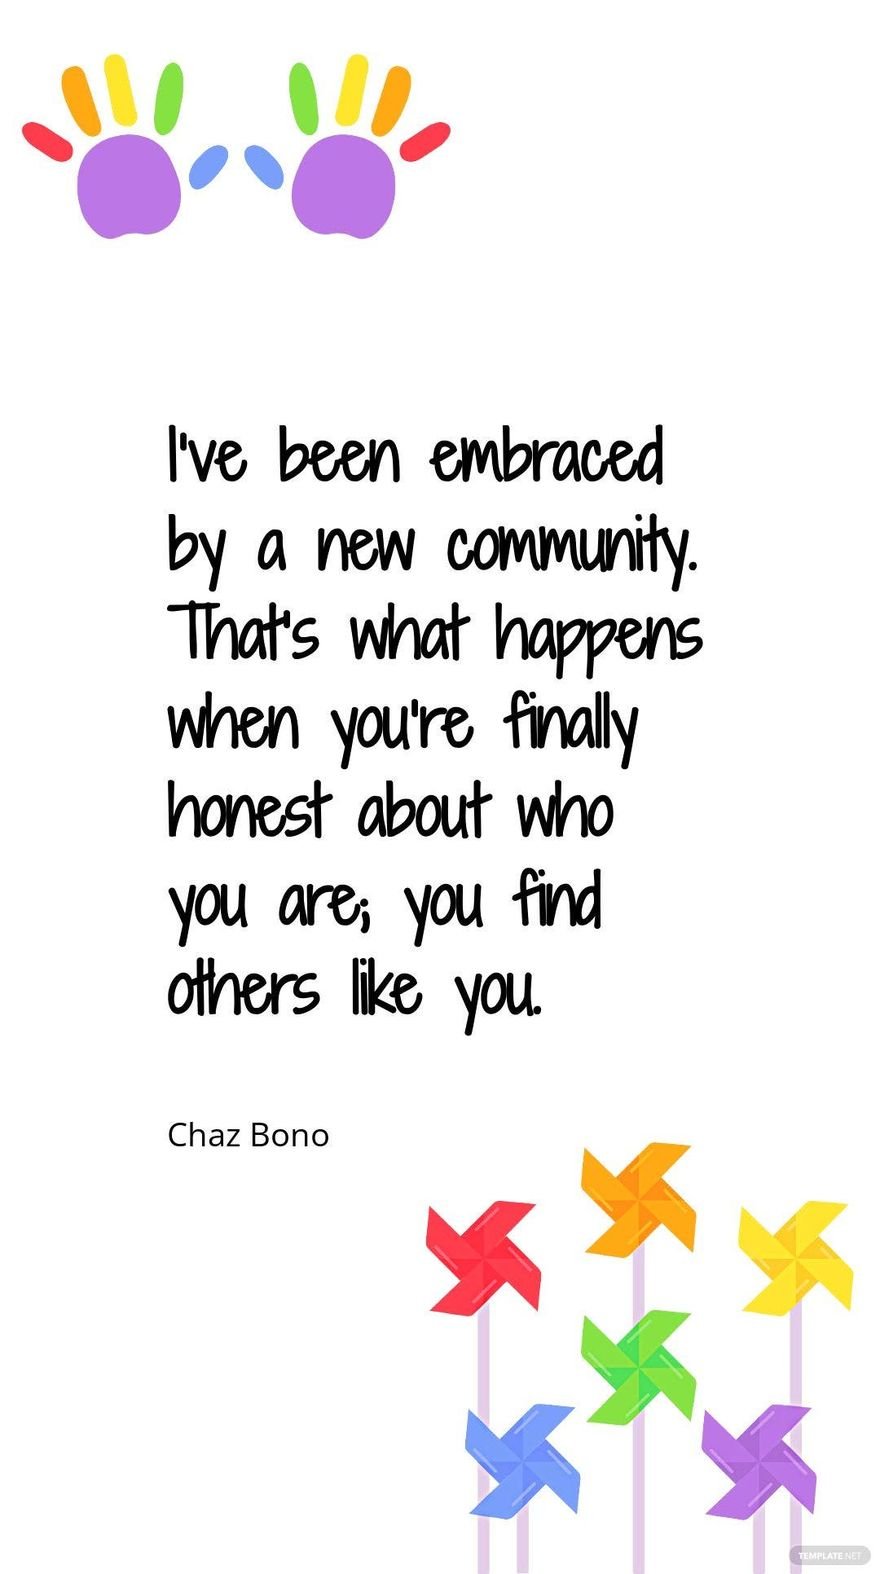 Chaz Bono - I’ve been embraced by a new community. That’s what happens when you’re finally honest about who you are; you find others like you. Template